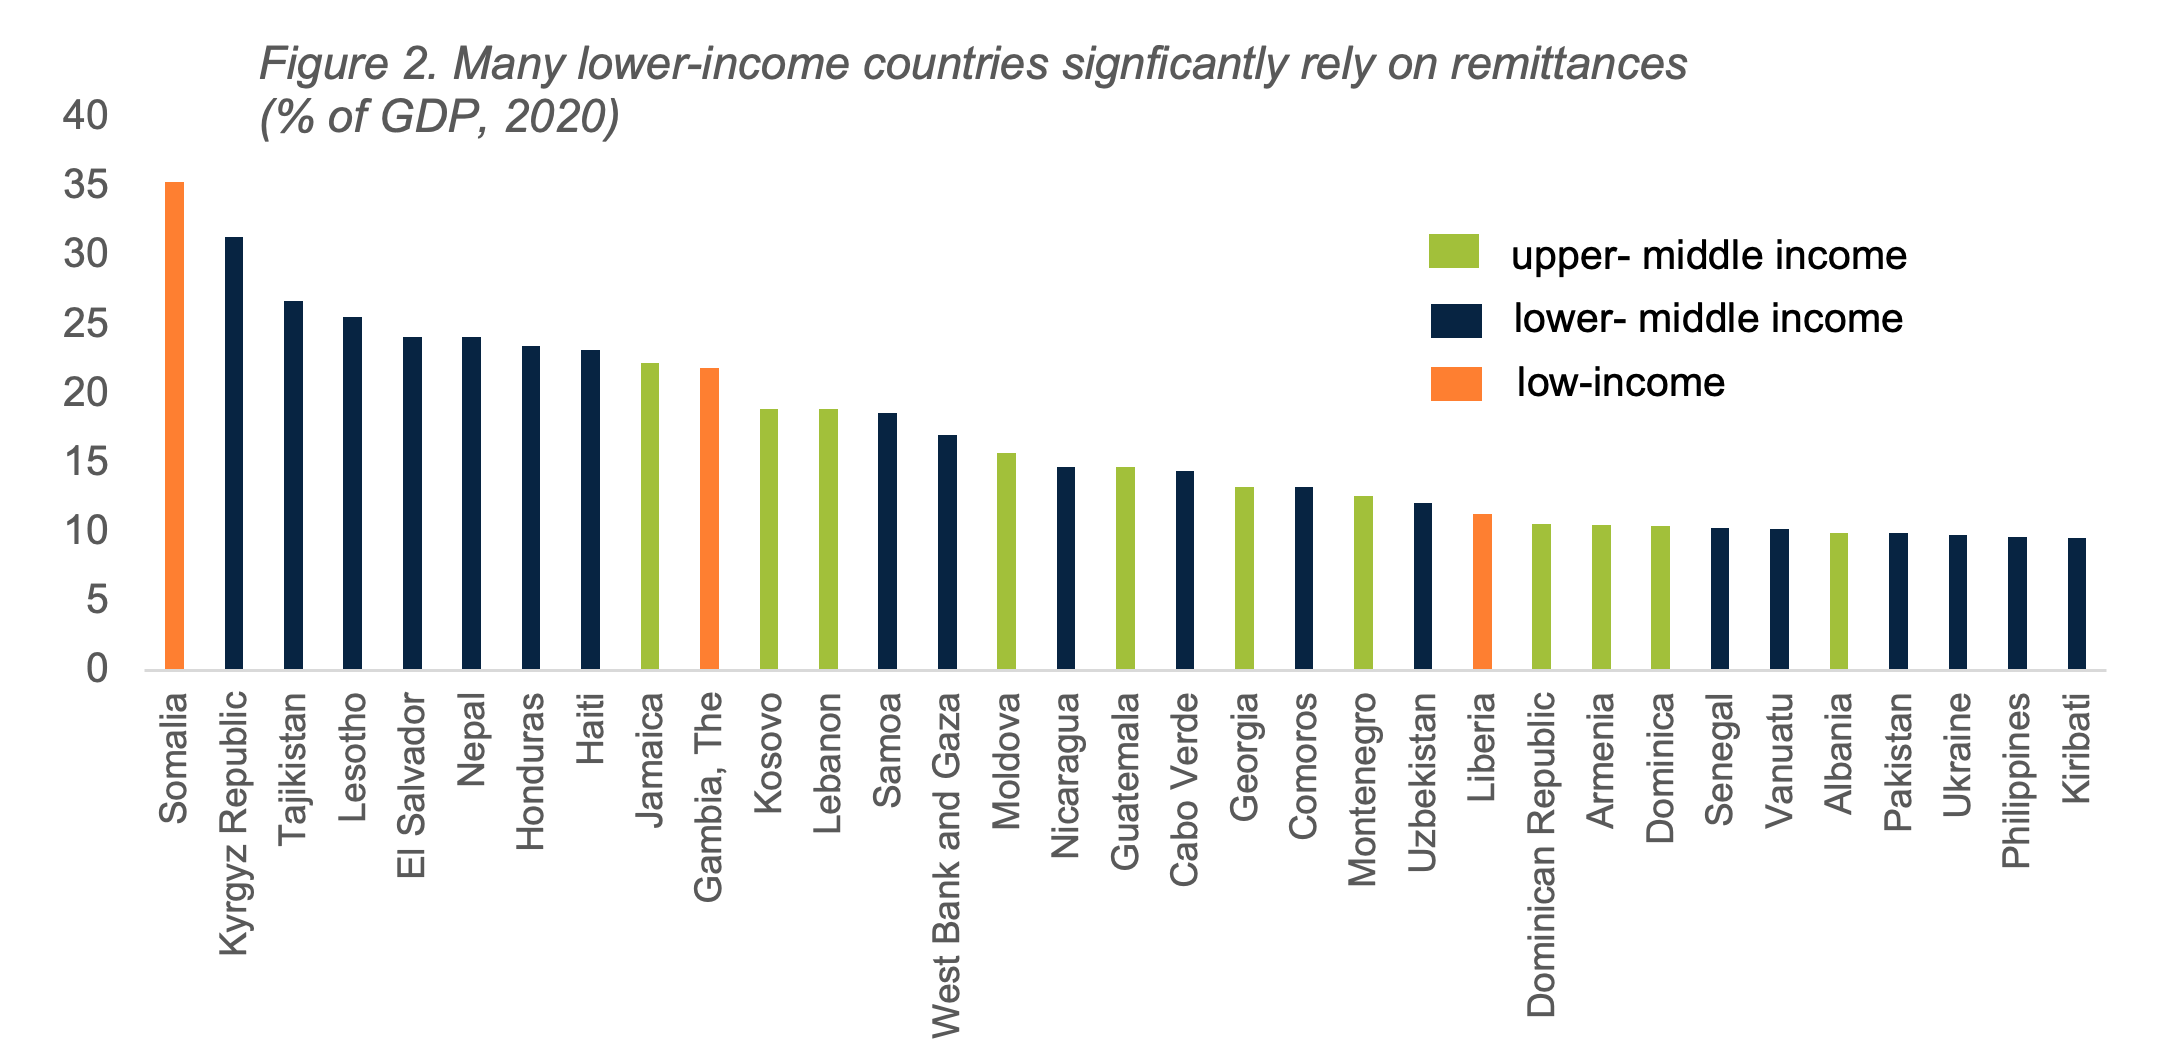 Many lower-income countries signficantly rely on remittances (% of GDP, 2020)